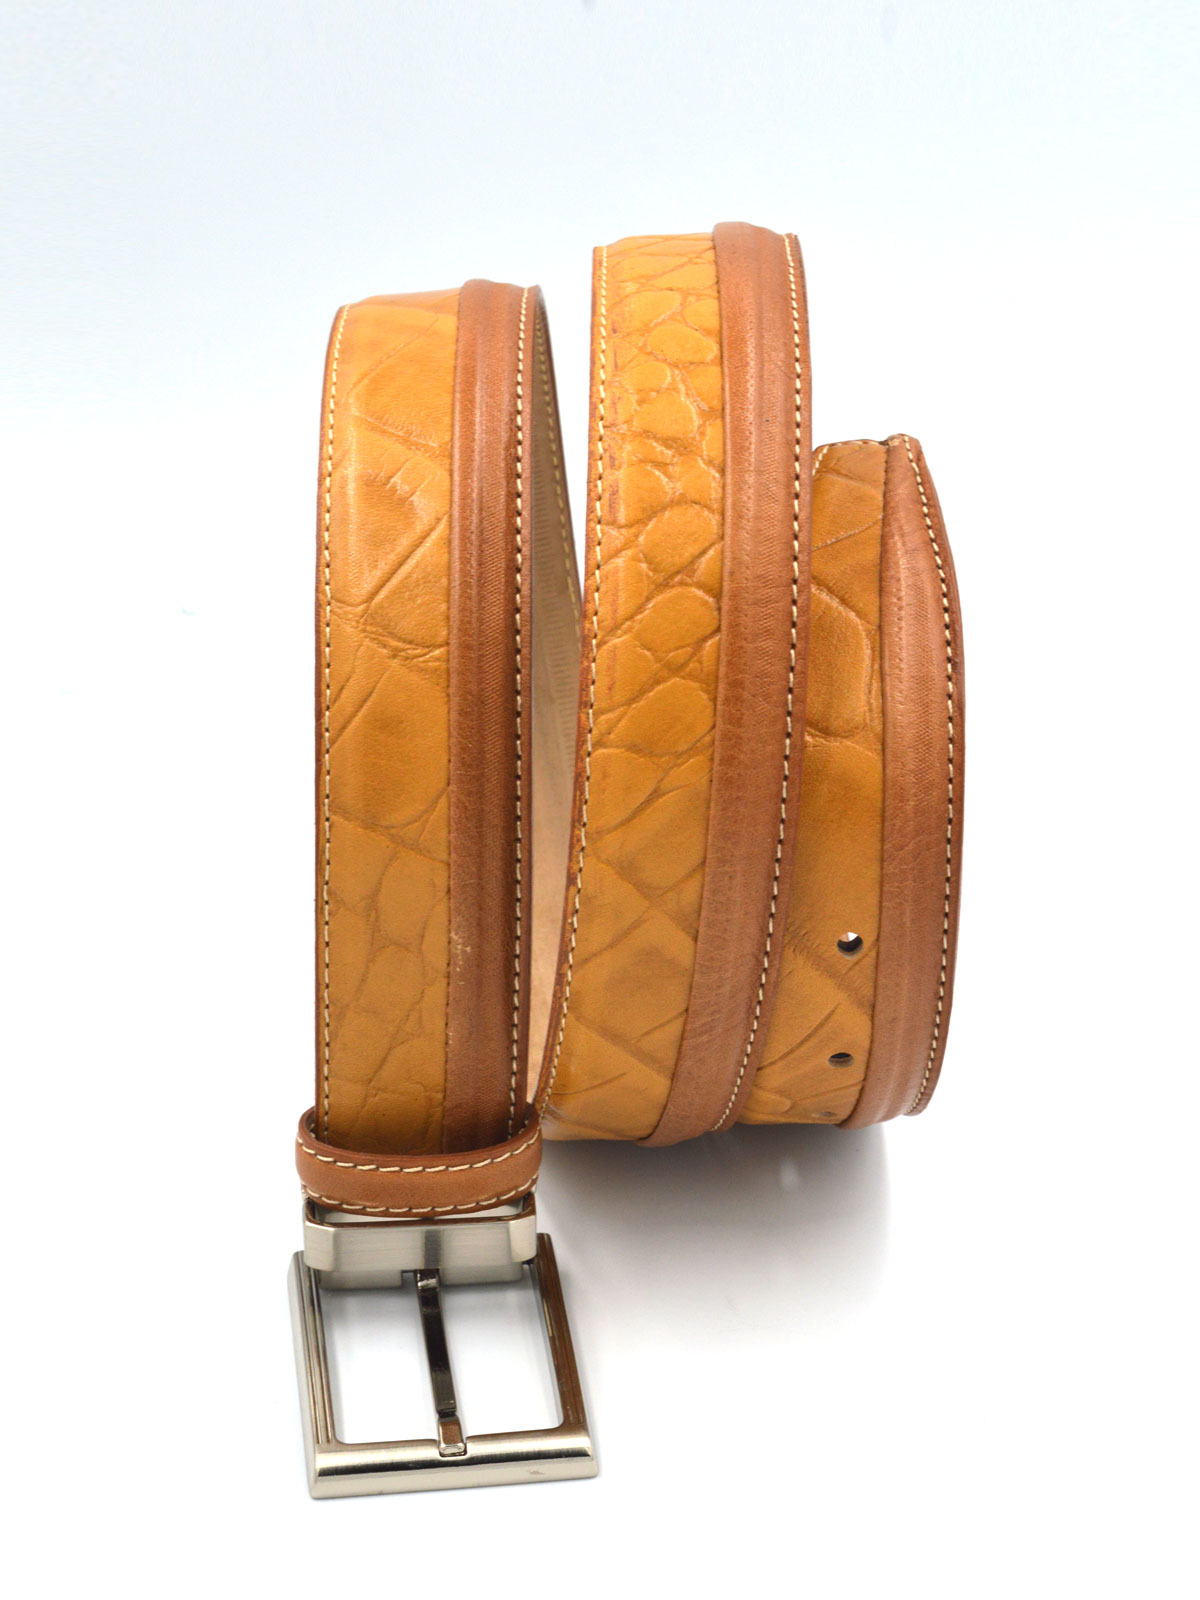 Mens belt made of natural leather - 10455 - € 24.75 img2